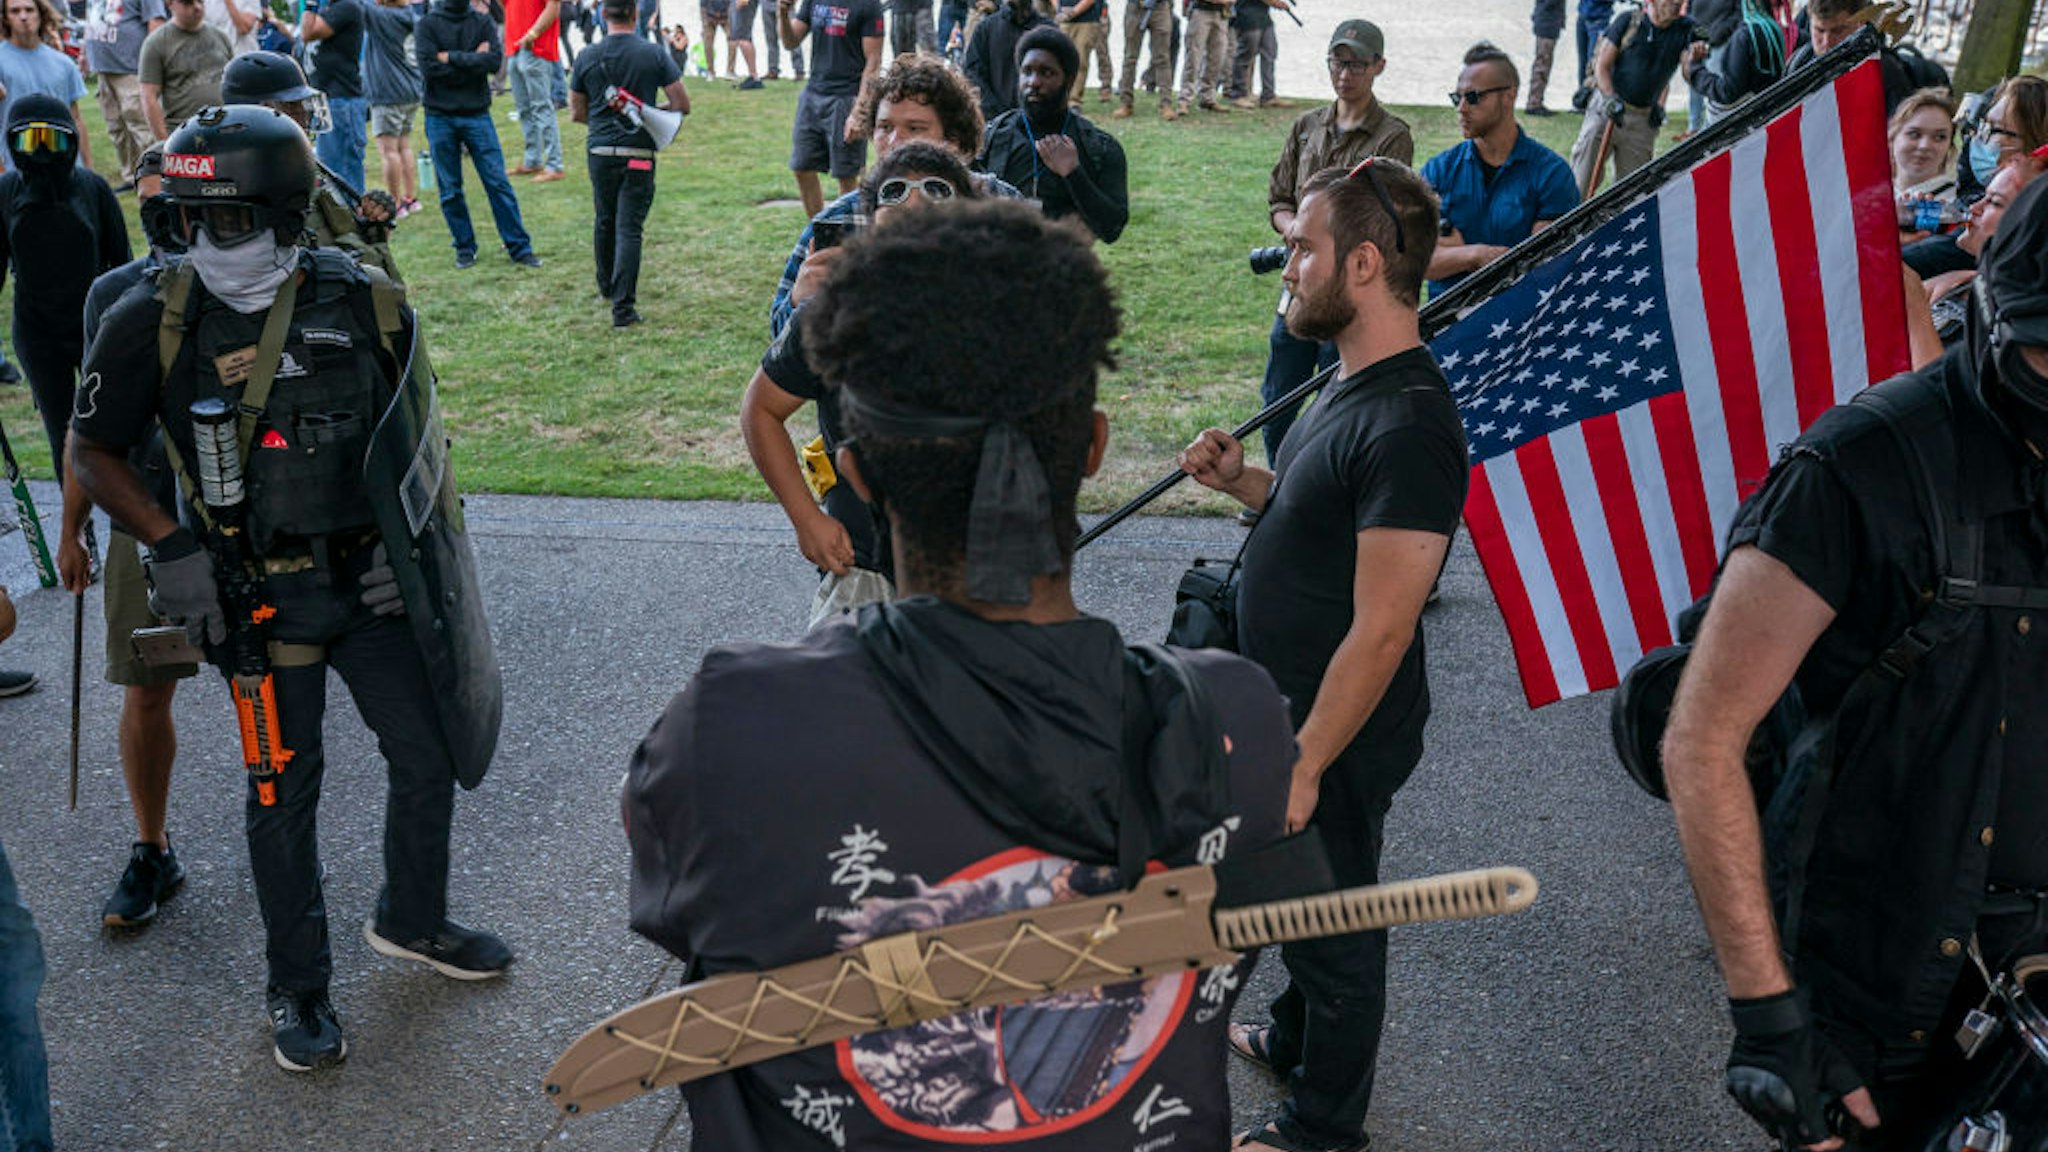 PORTLAND, OR - AUGUST 08: Far-right extremists and anti-fascists argue on August 8, 2021 in Portland, Oregon. The two groups clashed near a religious gathering in downtown Portland for the second day in a row without a police response.